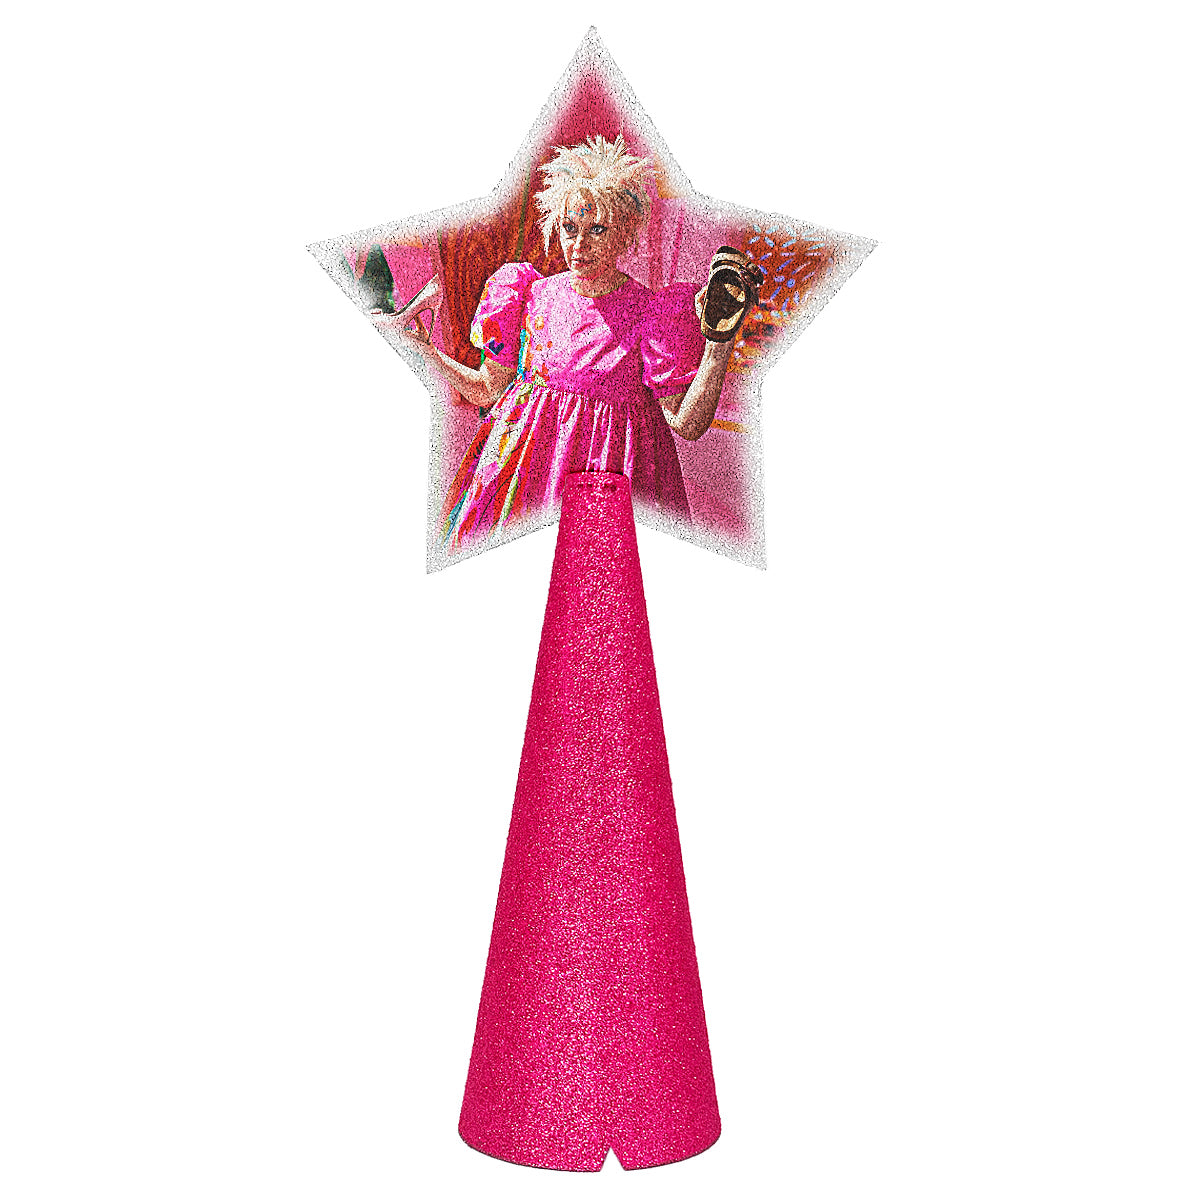 Custom tree topper - with sample Weird Barbie photo - hot pink/magenta glitter cone - double-sided back